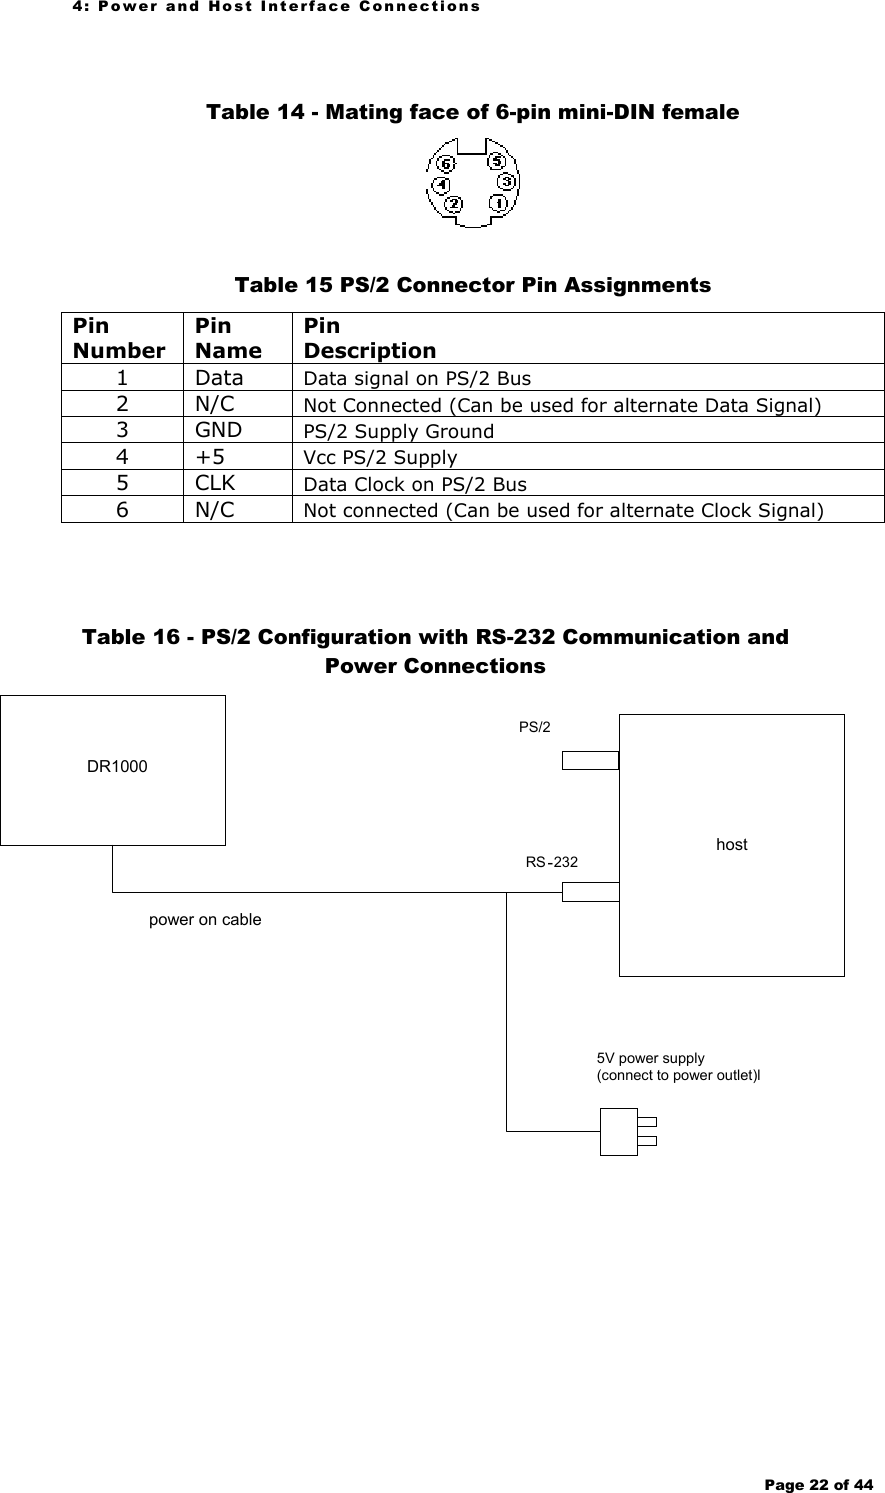 4: Power and Host Interface Connections Page 22 of 44    Table 14 - Mating face of 6-pin mini-DIN female   Table 15 PS/2 Connector Pin Assignments Pin Number Pin Name Pin Description 1 Data Data signal on PS/2 Bus 2 N/C  Not Connected (Can be used for alternate Data Signal) 3 GND PS/2 Supply Ground 4 +5  Vcc PS/2 Supply 5 CLK Data Clock on PS/2 Bus 6 N/C  Not connected (Can be used for alternate Clock Signal)  Table 16 - PS/2 Configuration with RS-232 Communication and  Power Connections     DR1000 hostRS -232 power on cablePS/2 5V power supply (connect to power outlet)l  